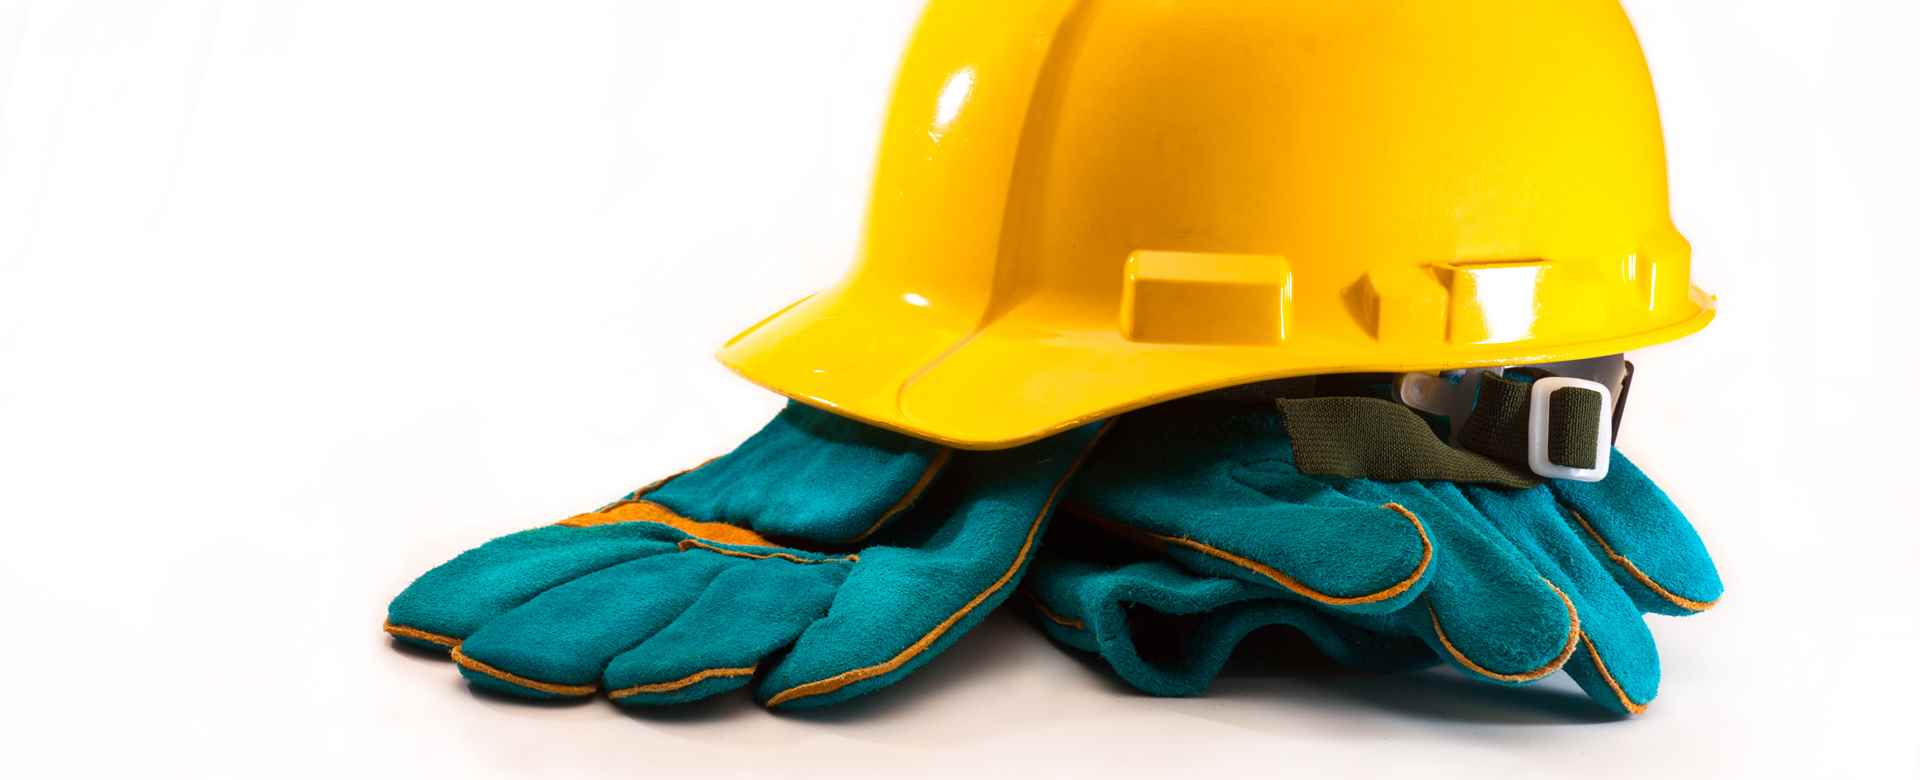 Workers' Compensation: Keeping Workers Safe by Prioritizing Prevention